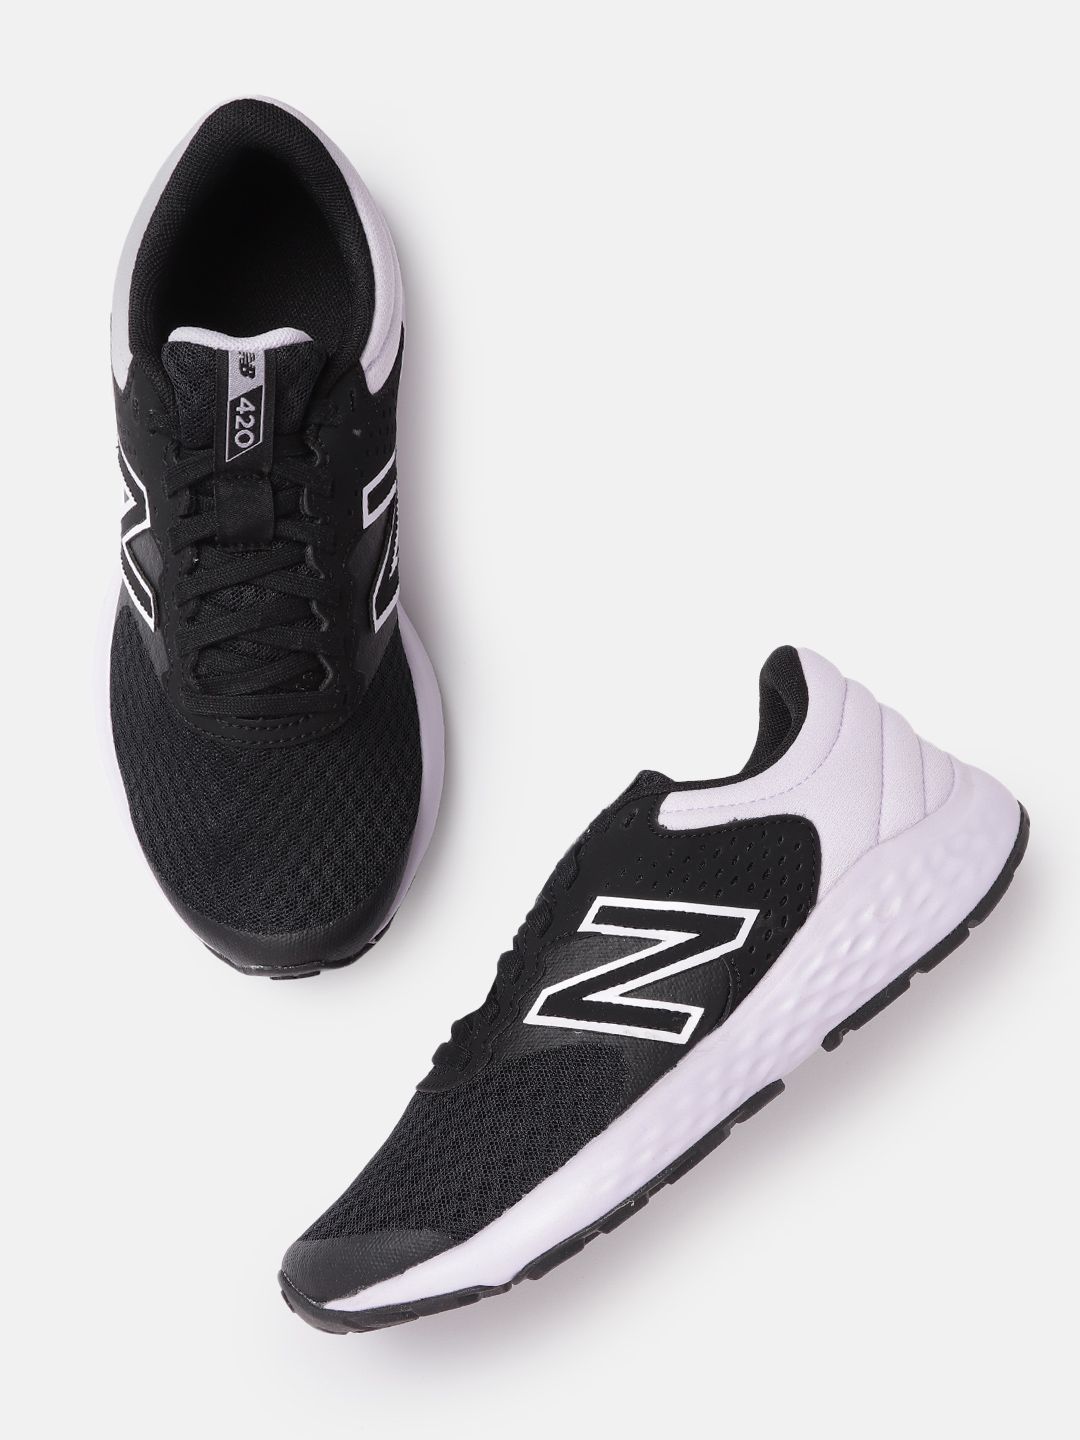 New Balance Women Black & White Woven Design Running Shoes Price in India